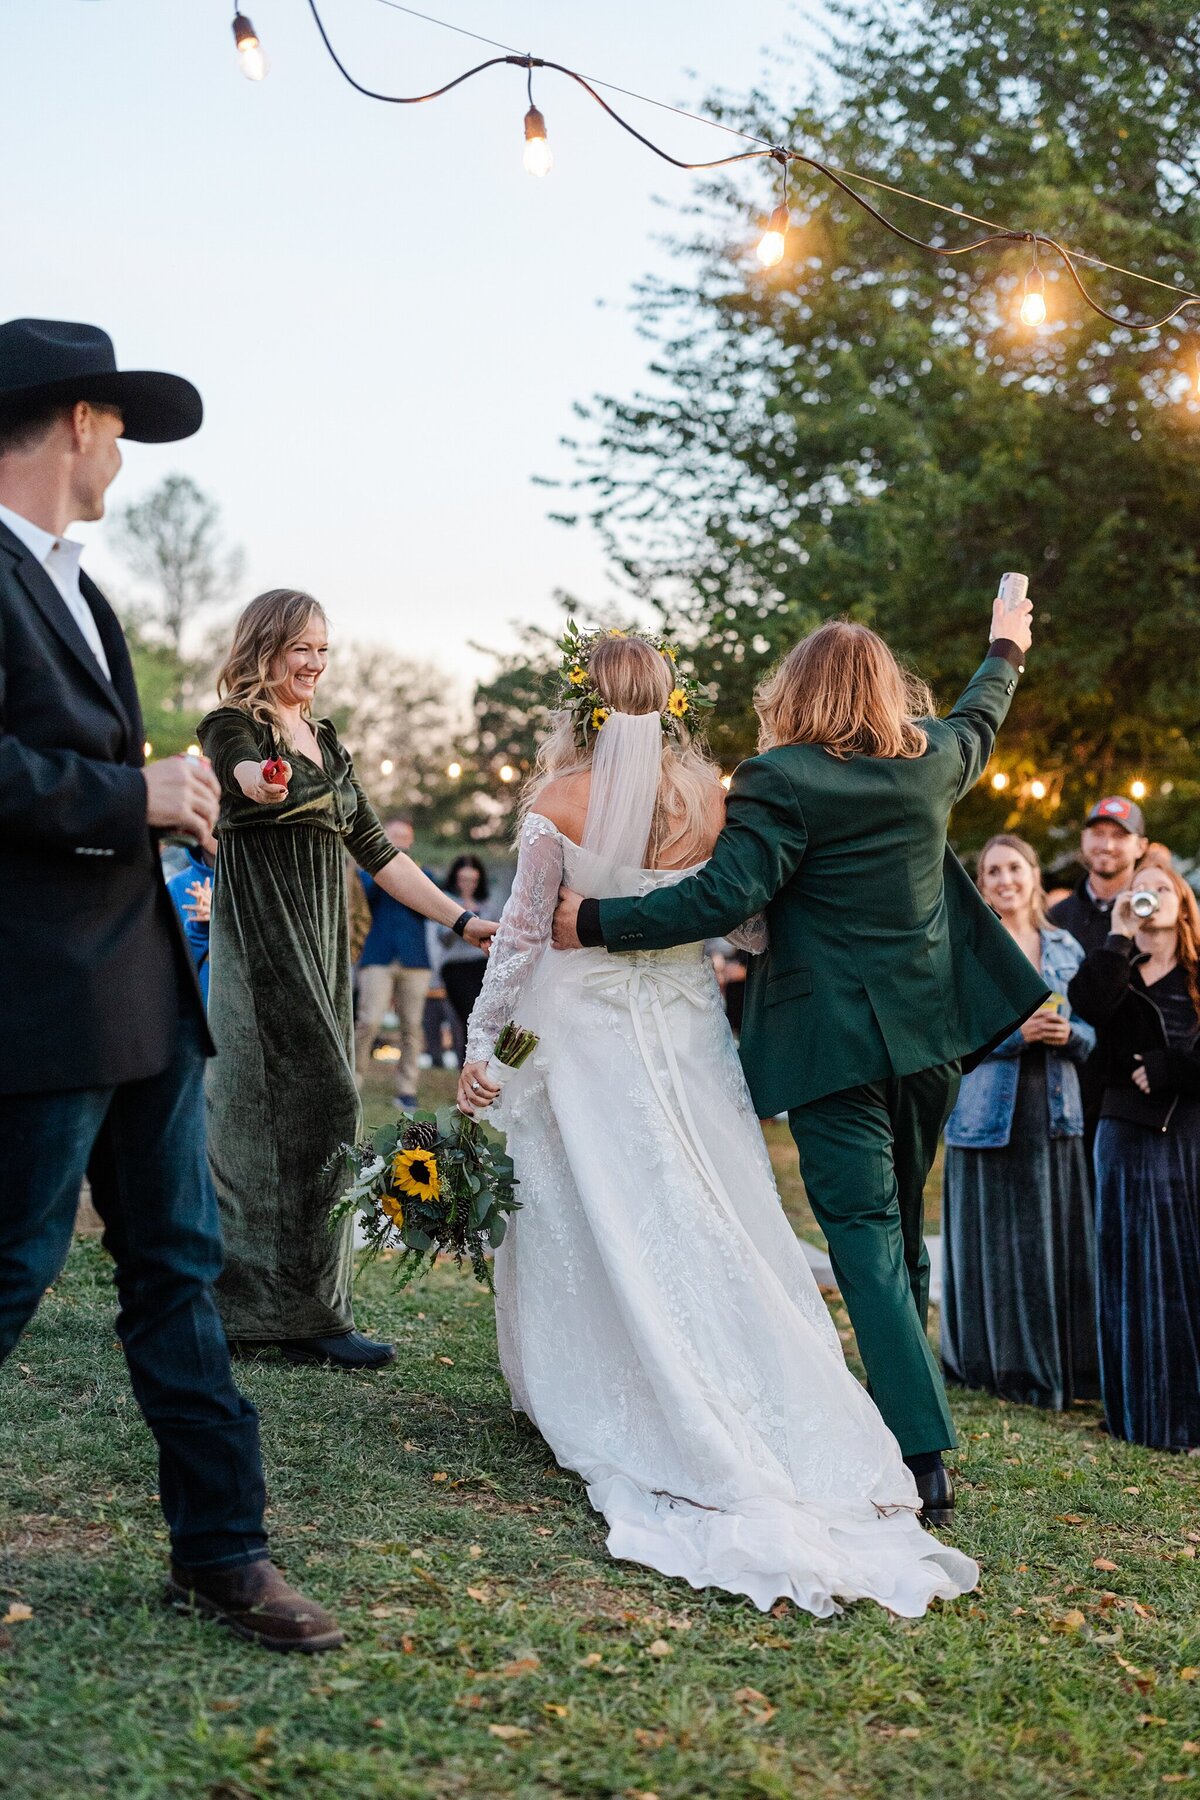 Shot of a bride and groom from behind as they are announced to enter their wedding reception in Fort Worth, Texas. The bride is on the left and is wearing a long, flowing, intricate, long sleeve, white dress with a veil and flower crown while holding a large bouquet. The groom is on the right and is wearing a green suit. Guests celebrate and welcome them in on all sides.